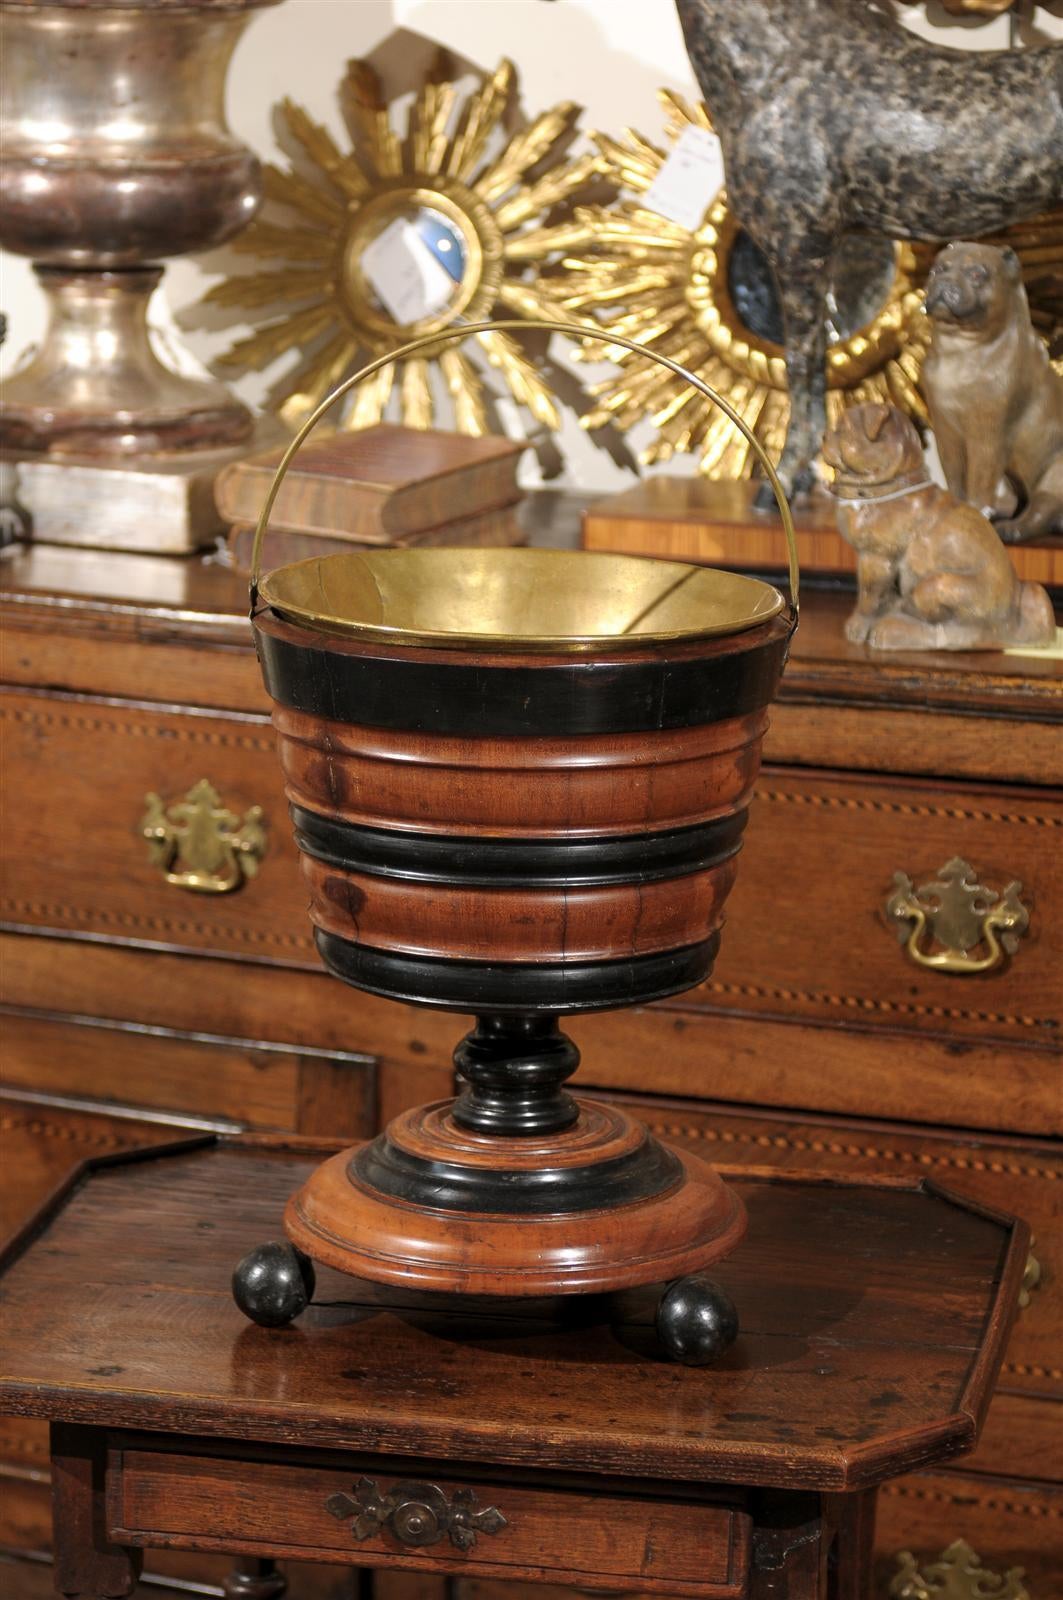 A 19th century English wooden peat bucket with brass lining. This walnut and ebonized wood peat bucket, circa 1860-1870 rests on three ball feet and has a removable brass lining. Peat buckets were common in England and Ireland during the 19th